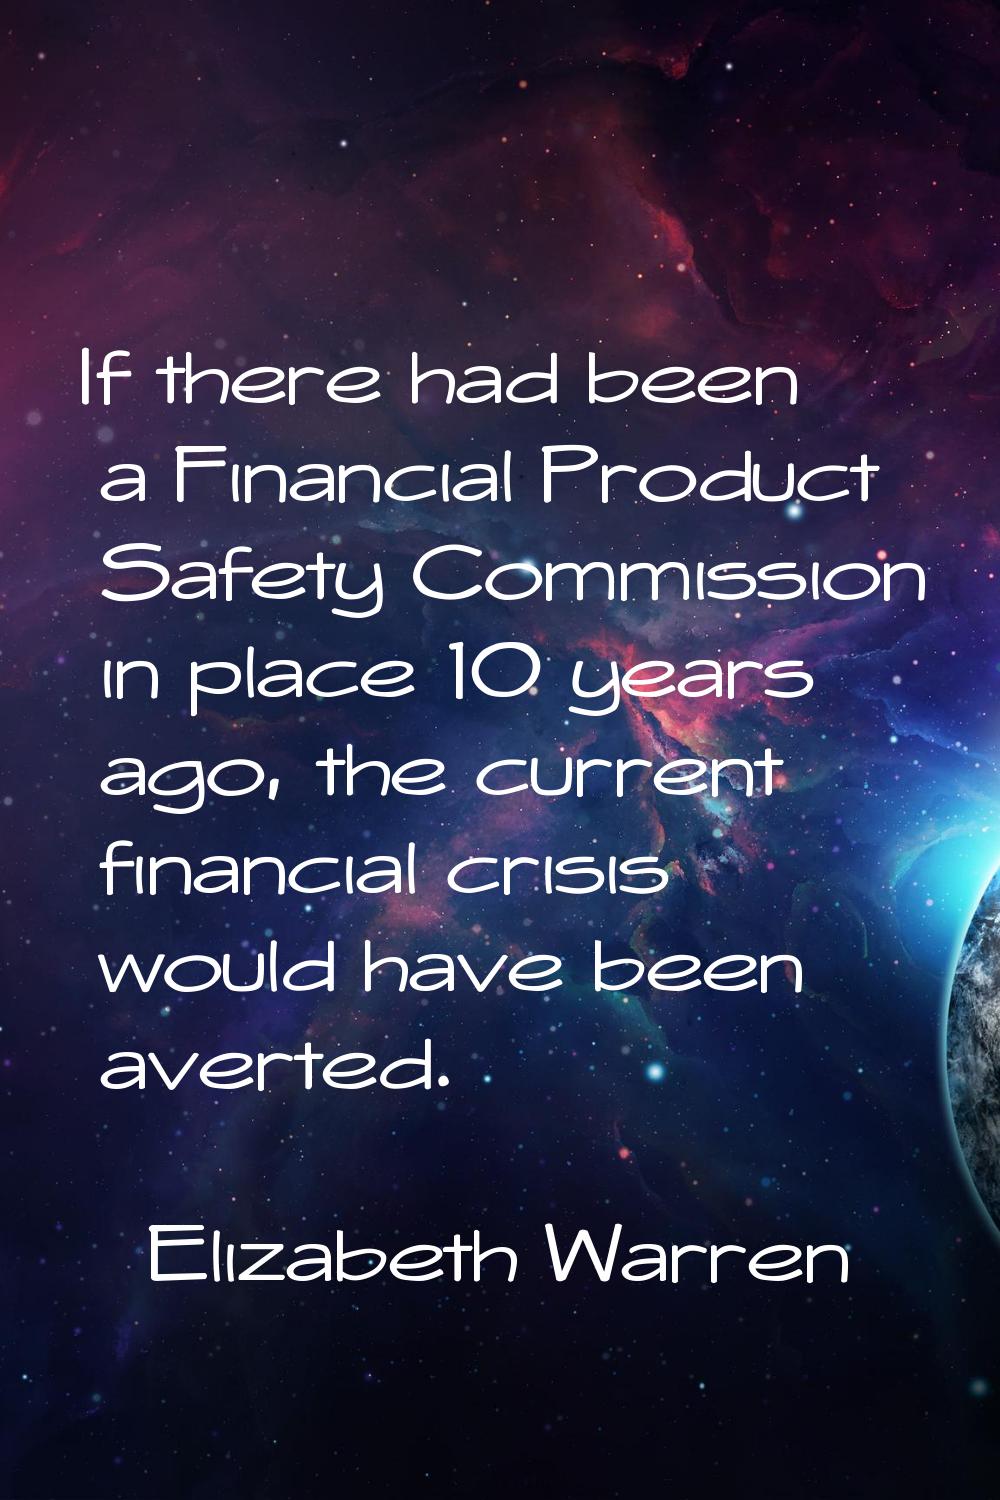 If there had been a Financial Product Safety Commission in place 10 years ago, the current financia